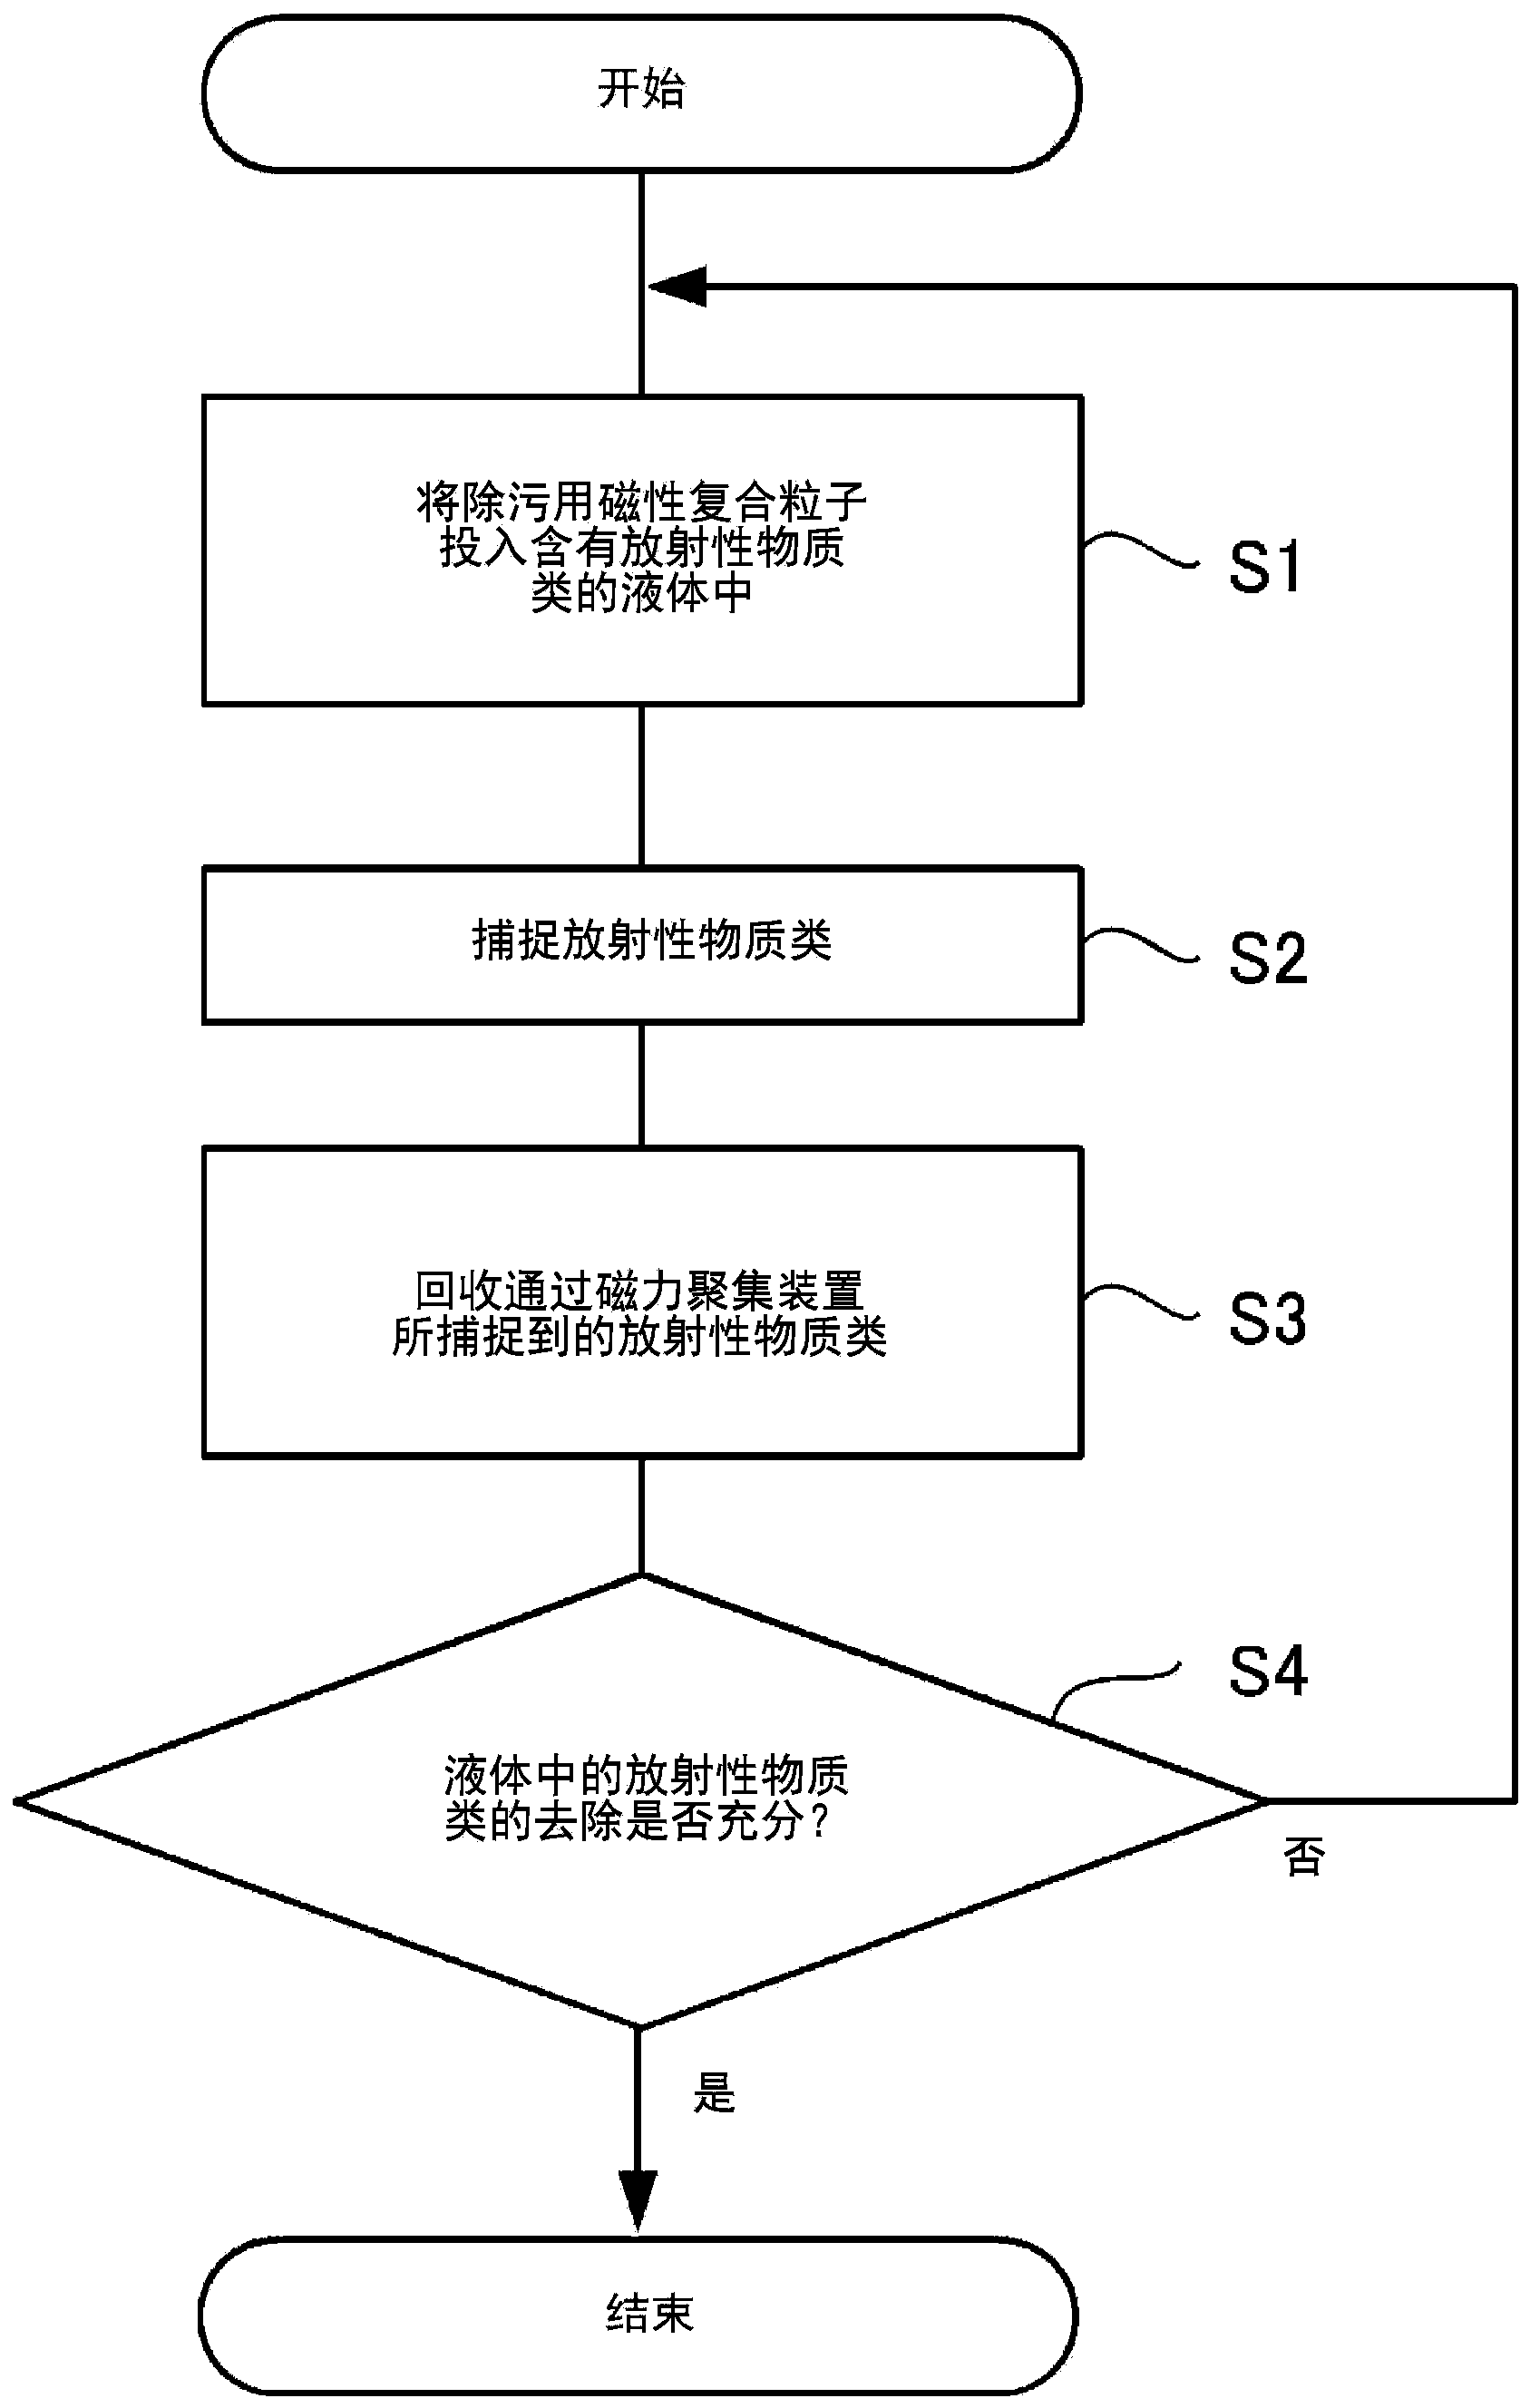 Magnetic composite particles for decontamination and method for producing same, and system for decontaminating radioactive materials and method for decontaminating radioactive materials